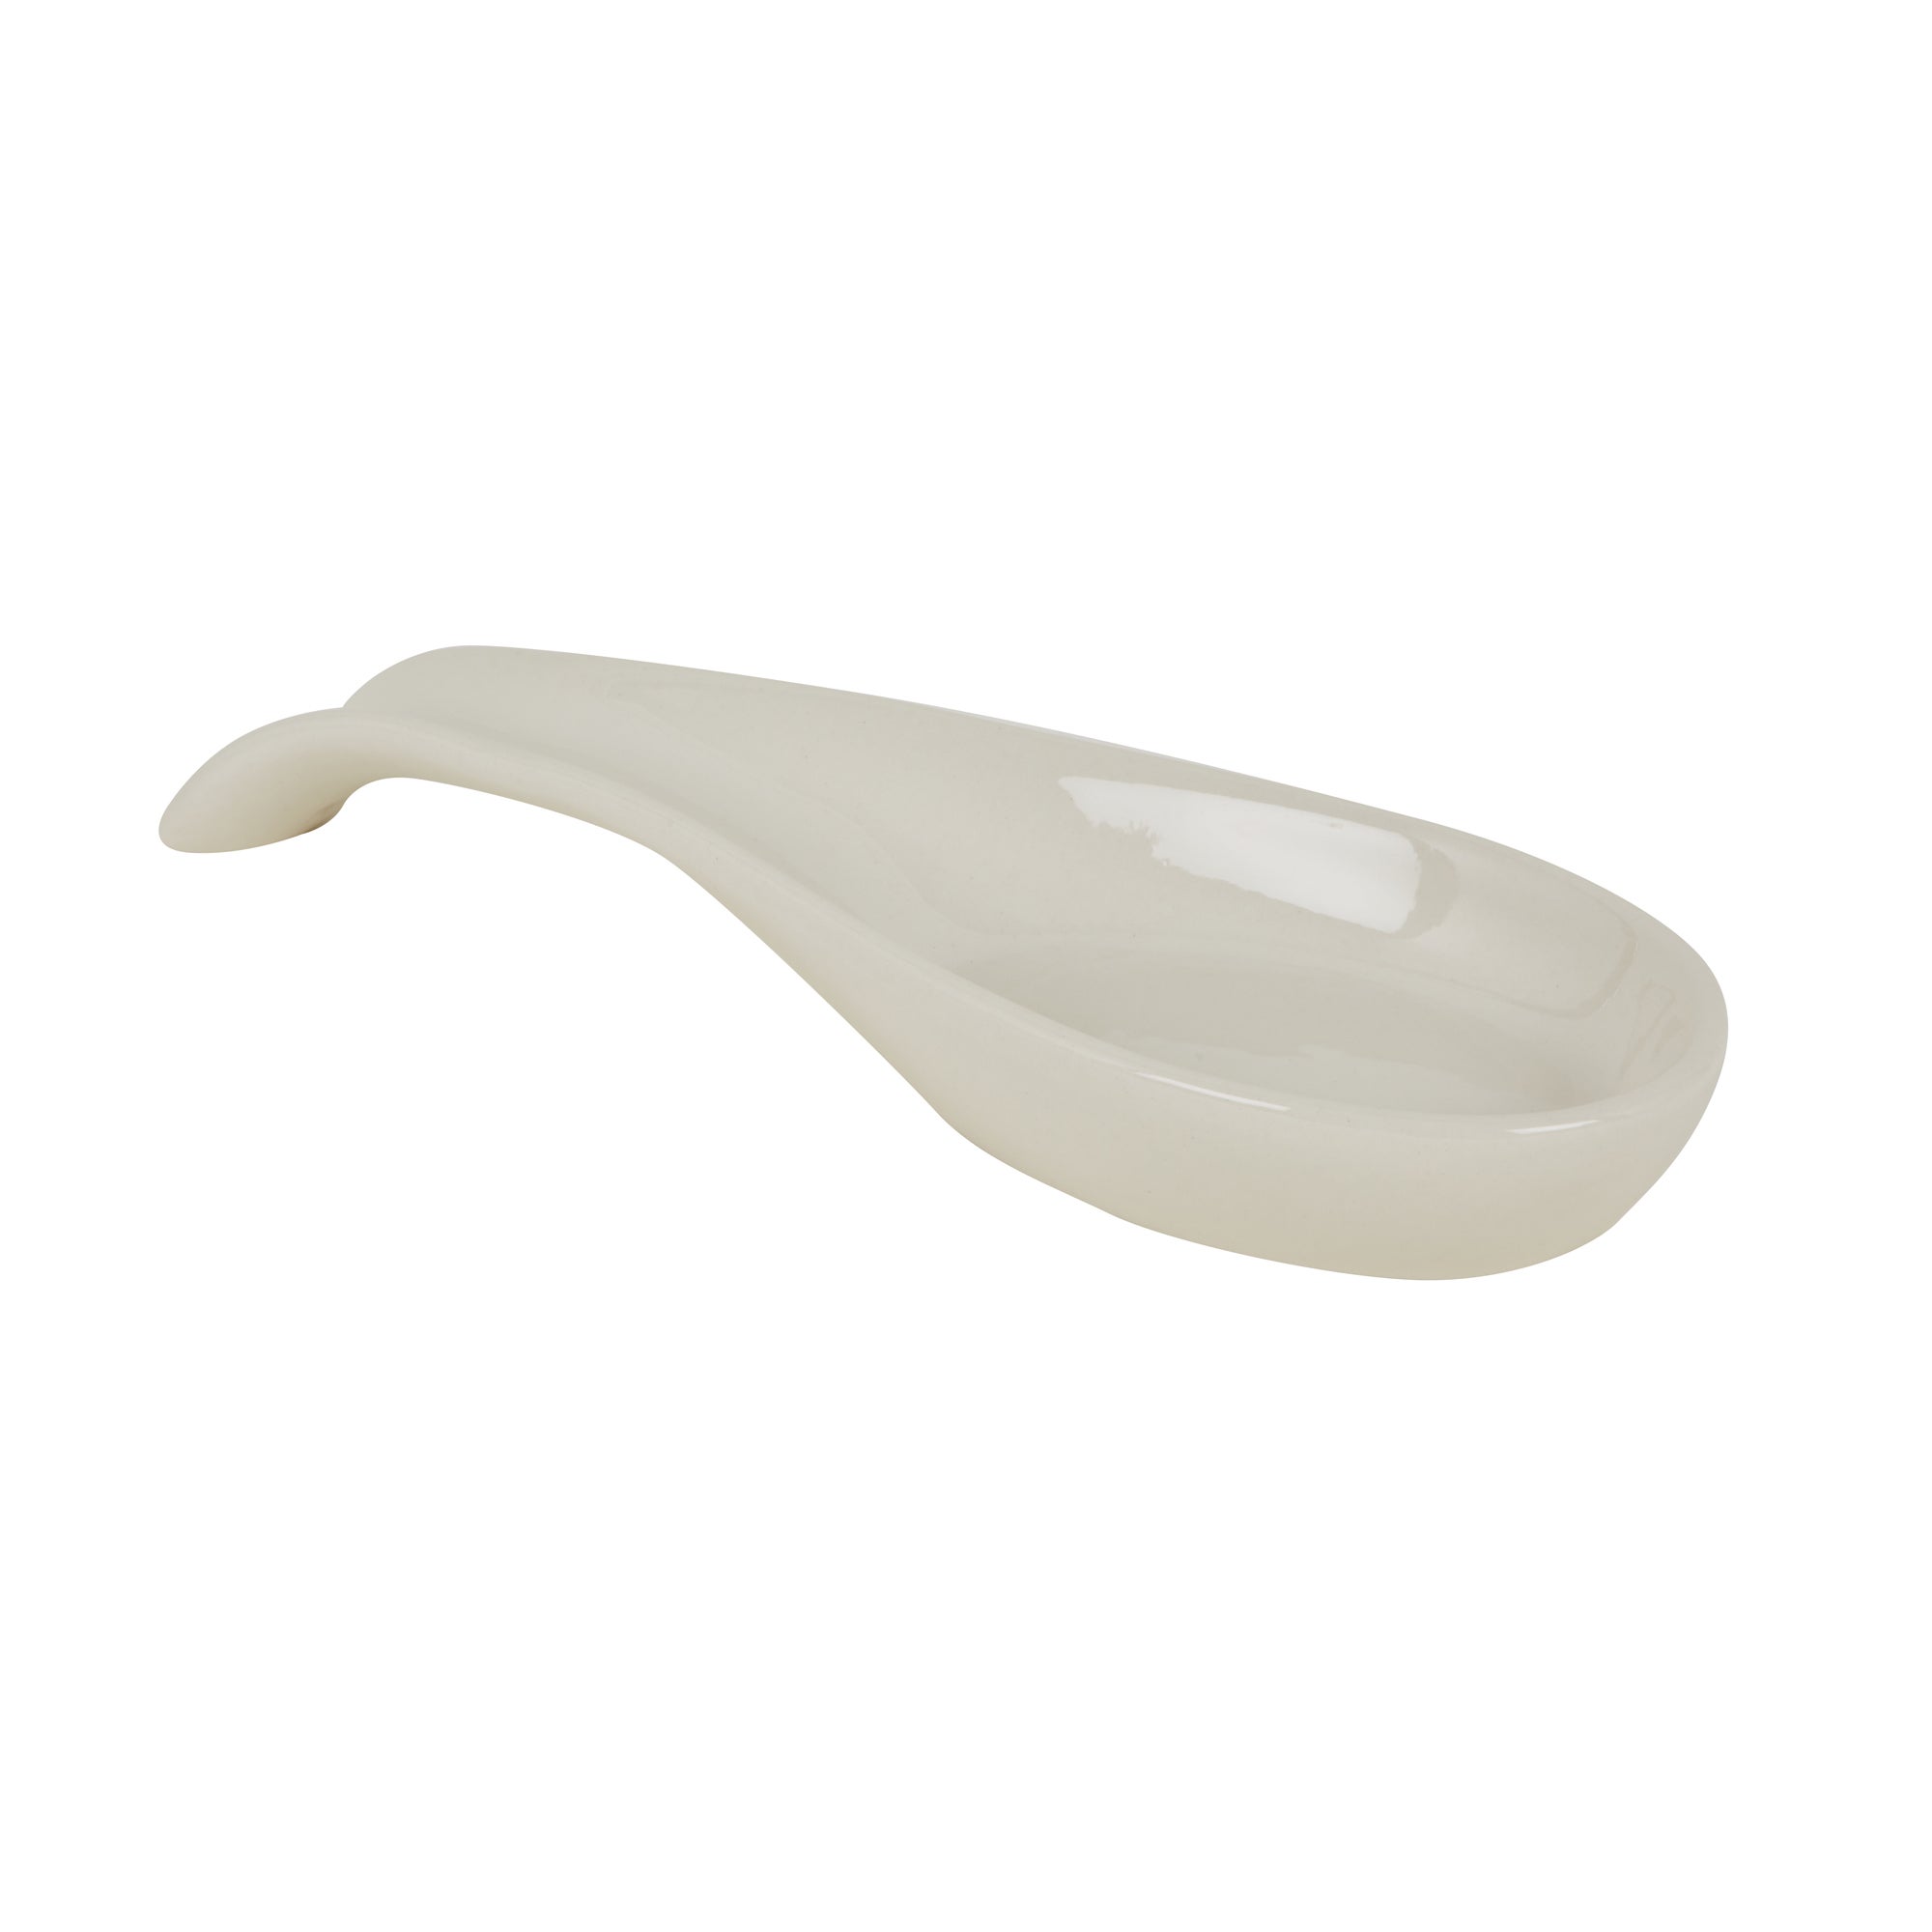 Hang Tag Cream Spoon Rest